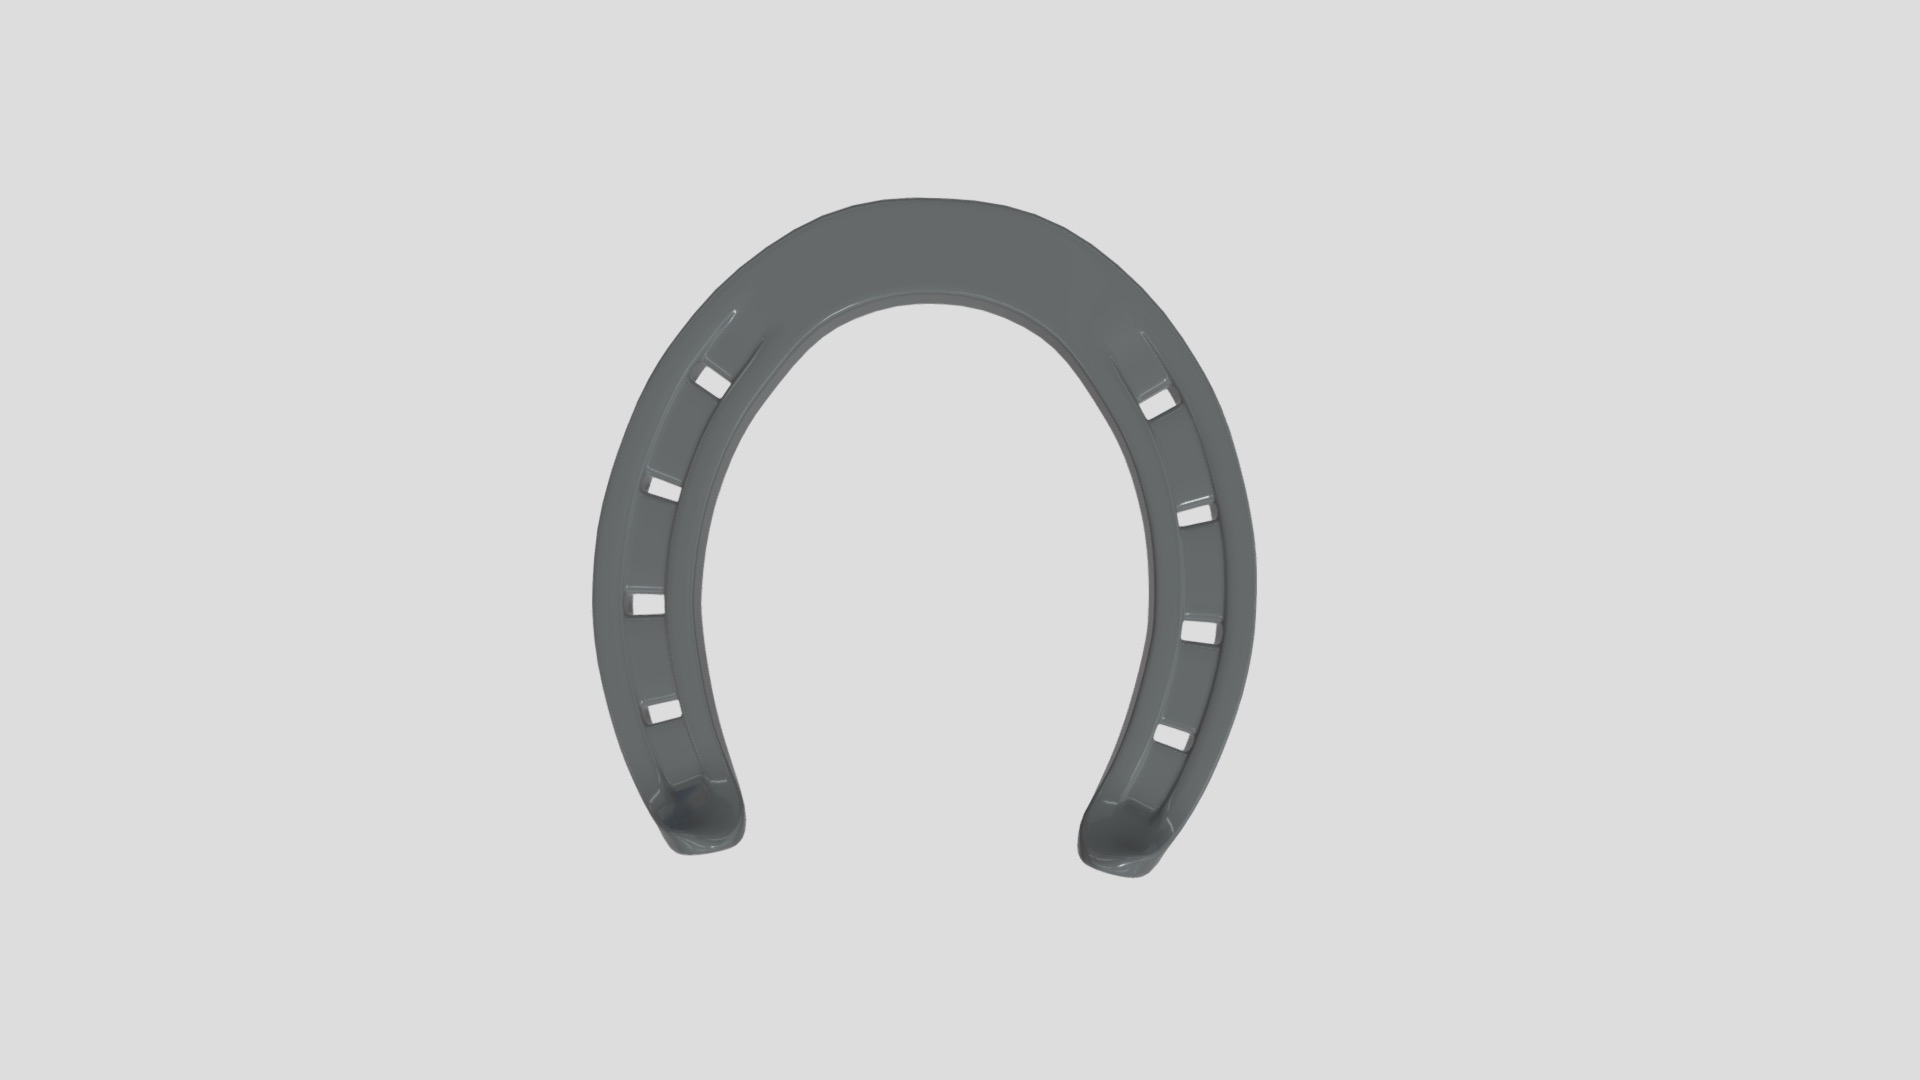 3D model Horse Shoe - This is a 3D model of the Horse Shoe. The 3D model is about a black and silver circular object.